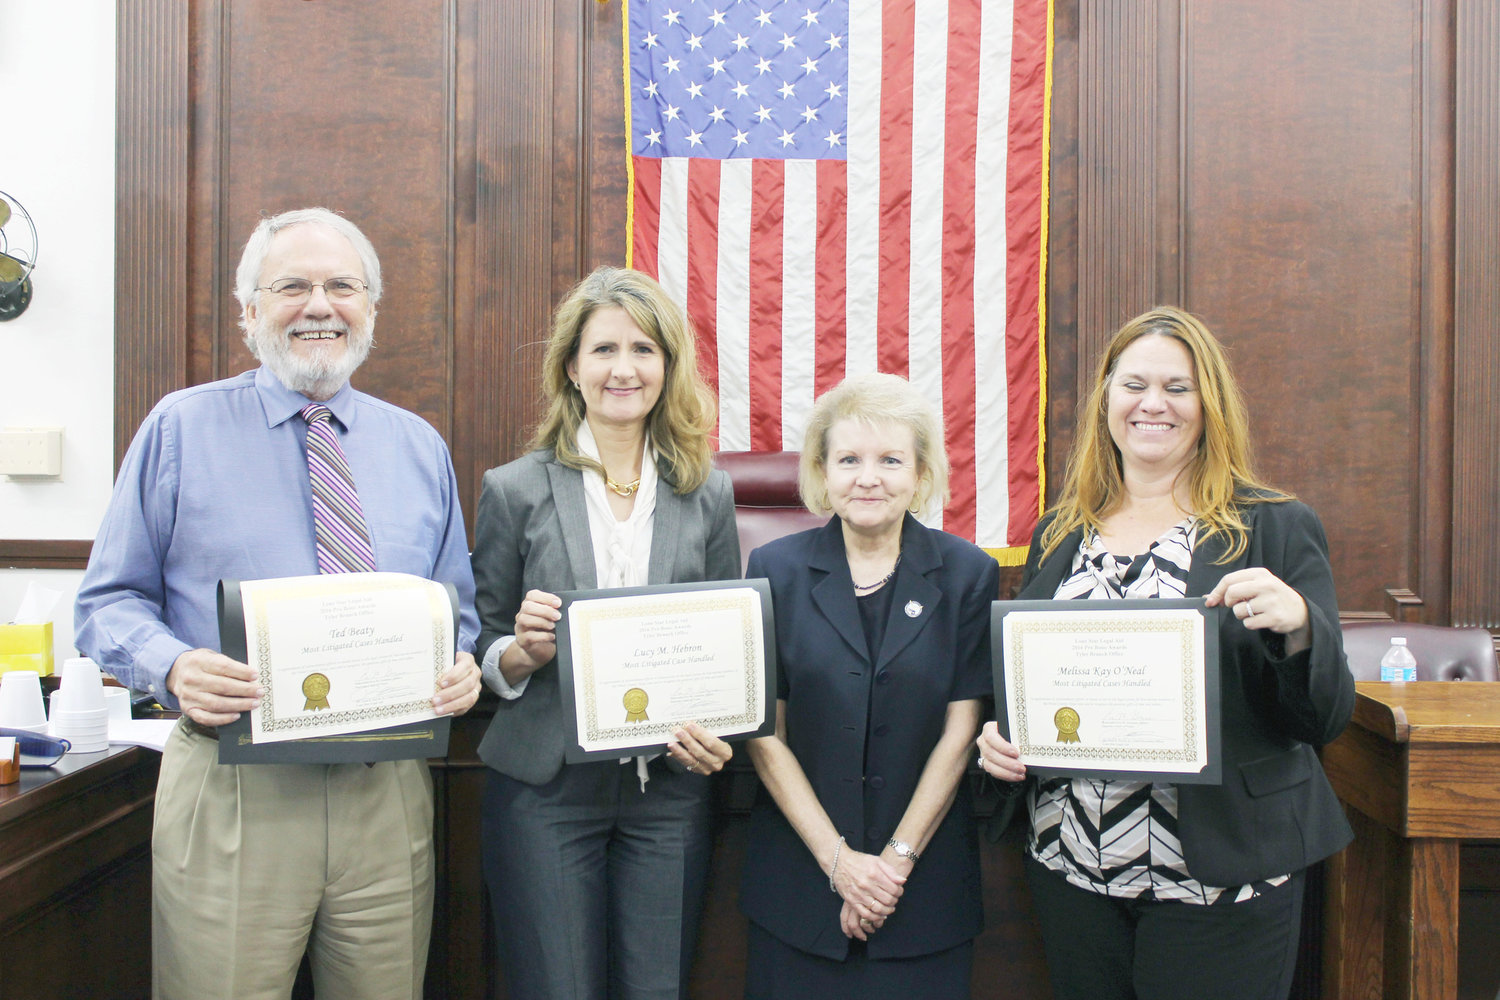 Attorneys Ted Beaty of Winnsboro, Lucy Hebron of Mineola (on left and second from left) and Melissa O’Neal, right, flank Dana Bias of Lone Star Legal aid. The three local attorneys were honored for giving back to their community. Lone Star Legal Aid is seeking other attorneys willing to do pro bono work. (Monitor photo by Doris Newman)